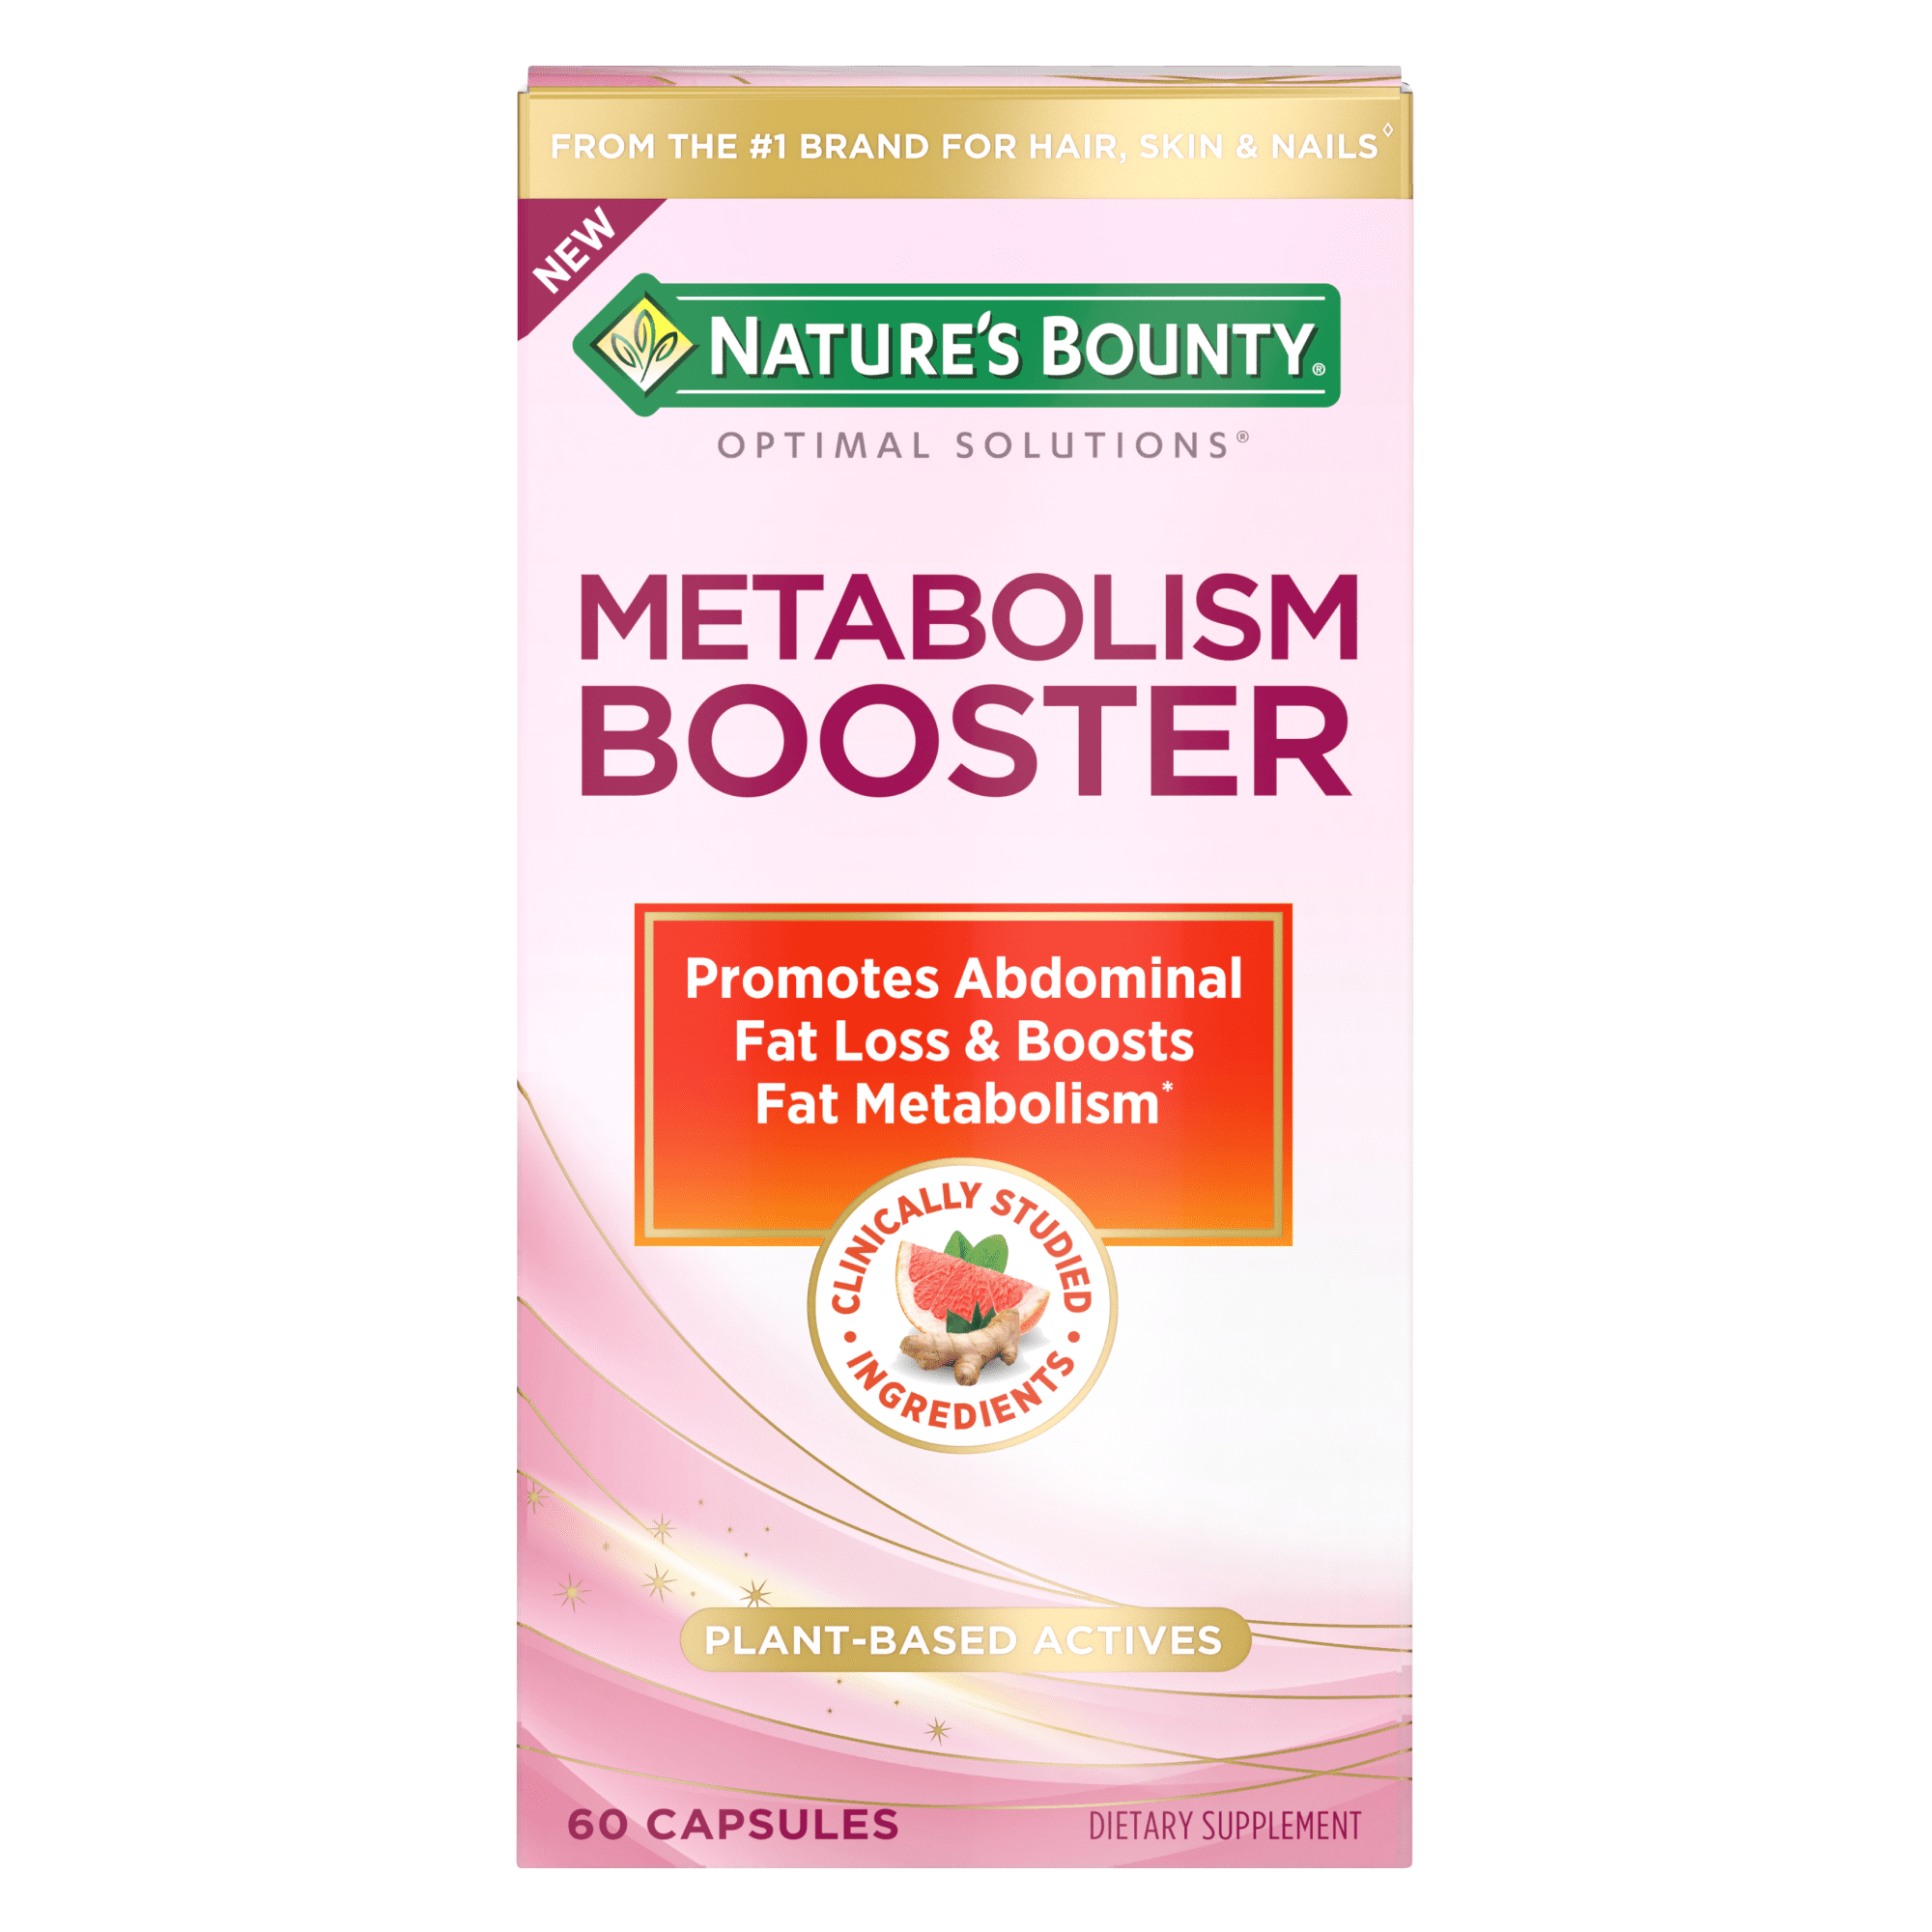 Natural metabolism boost for fat loss